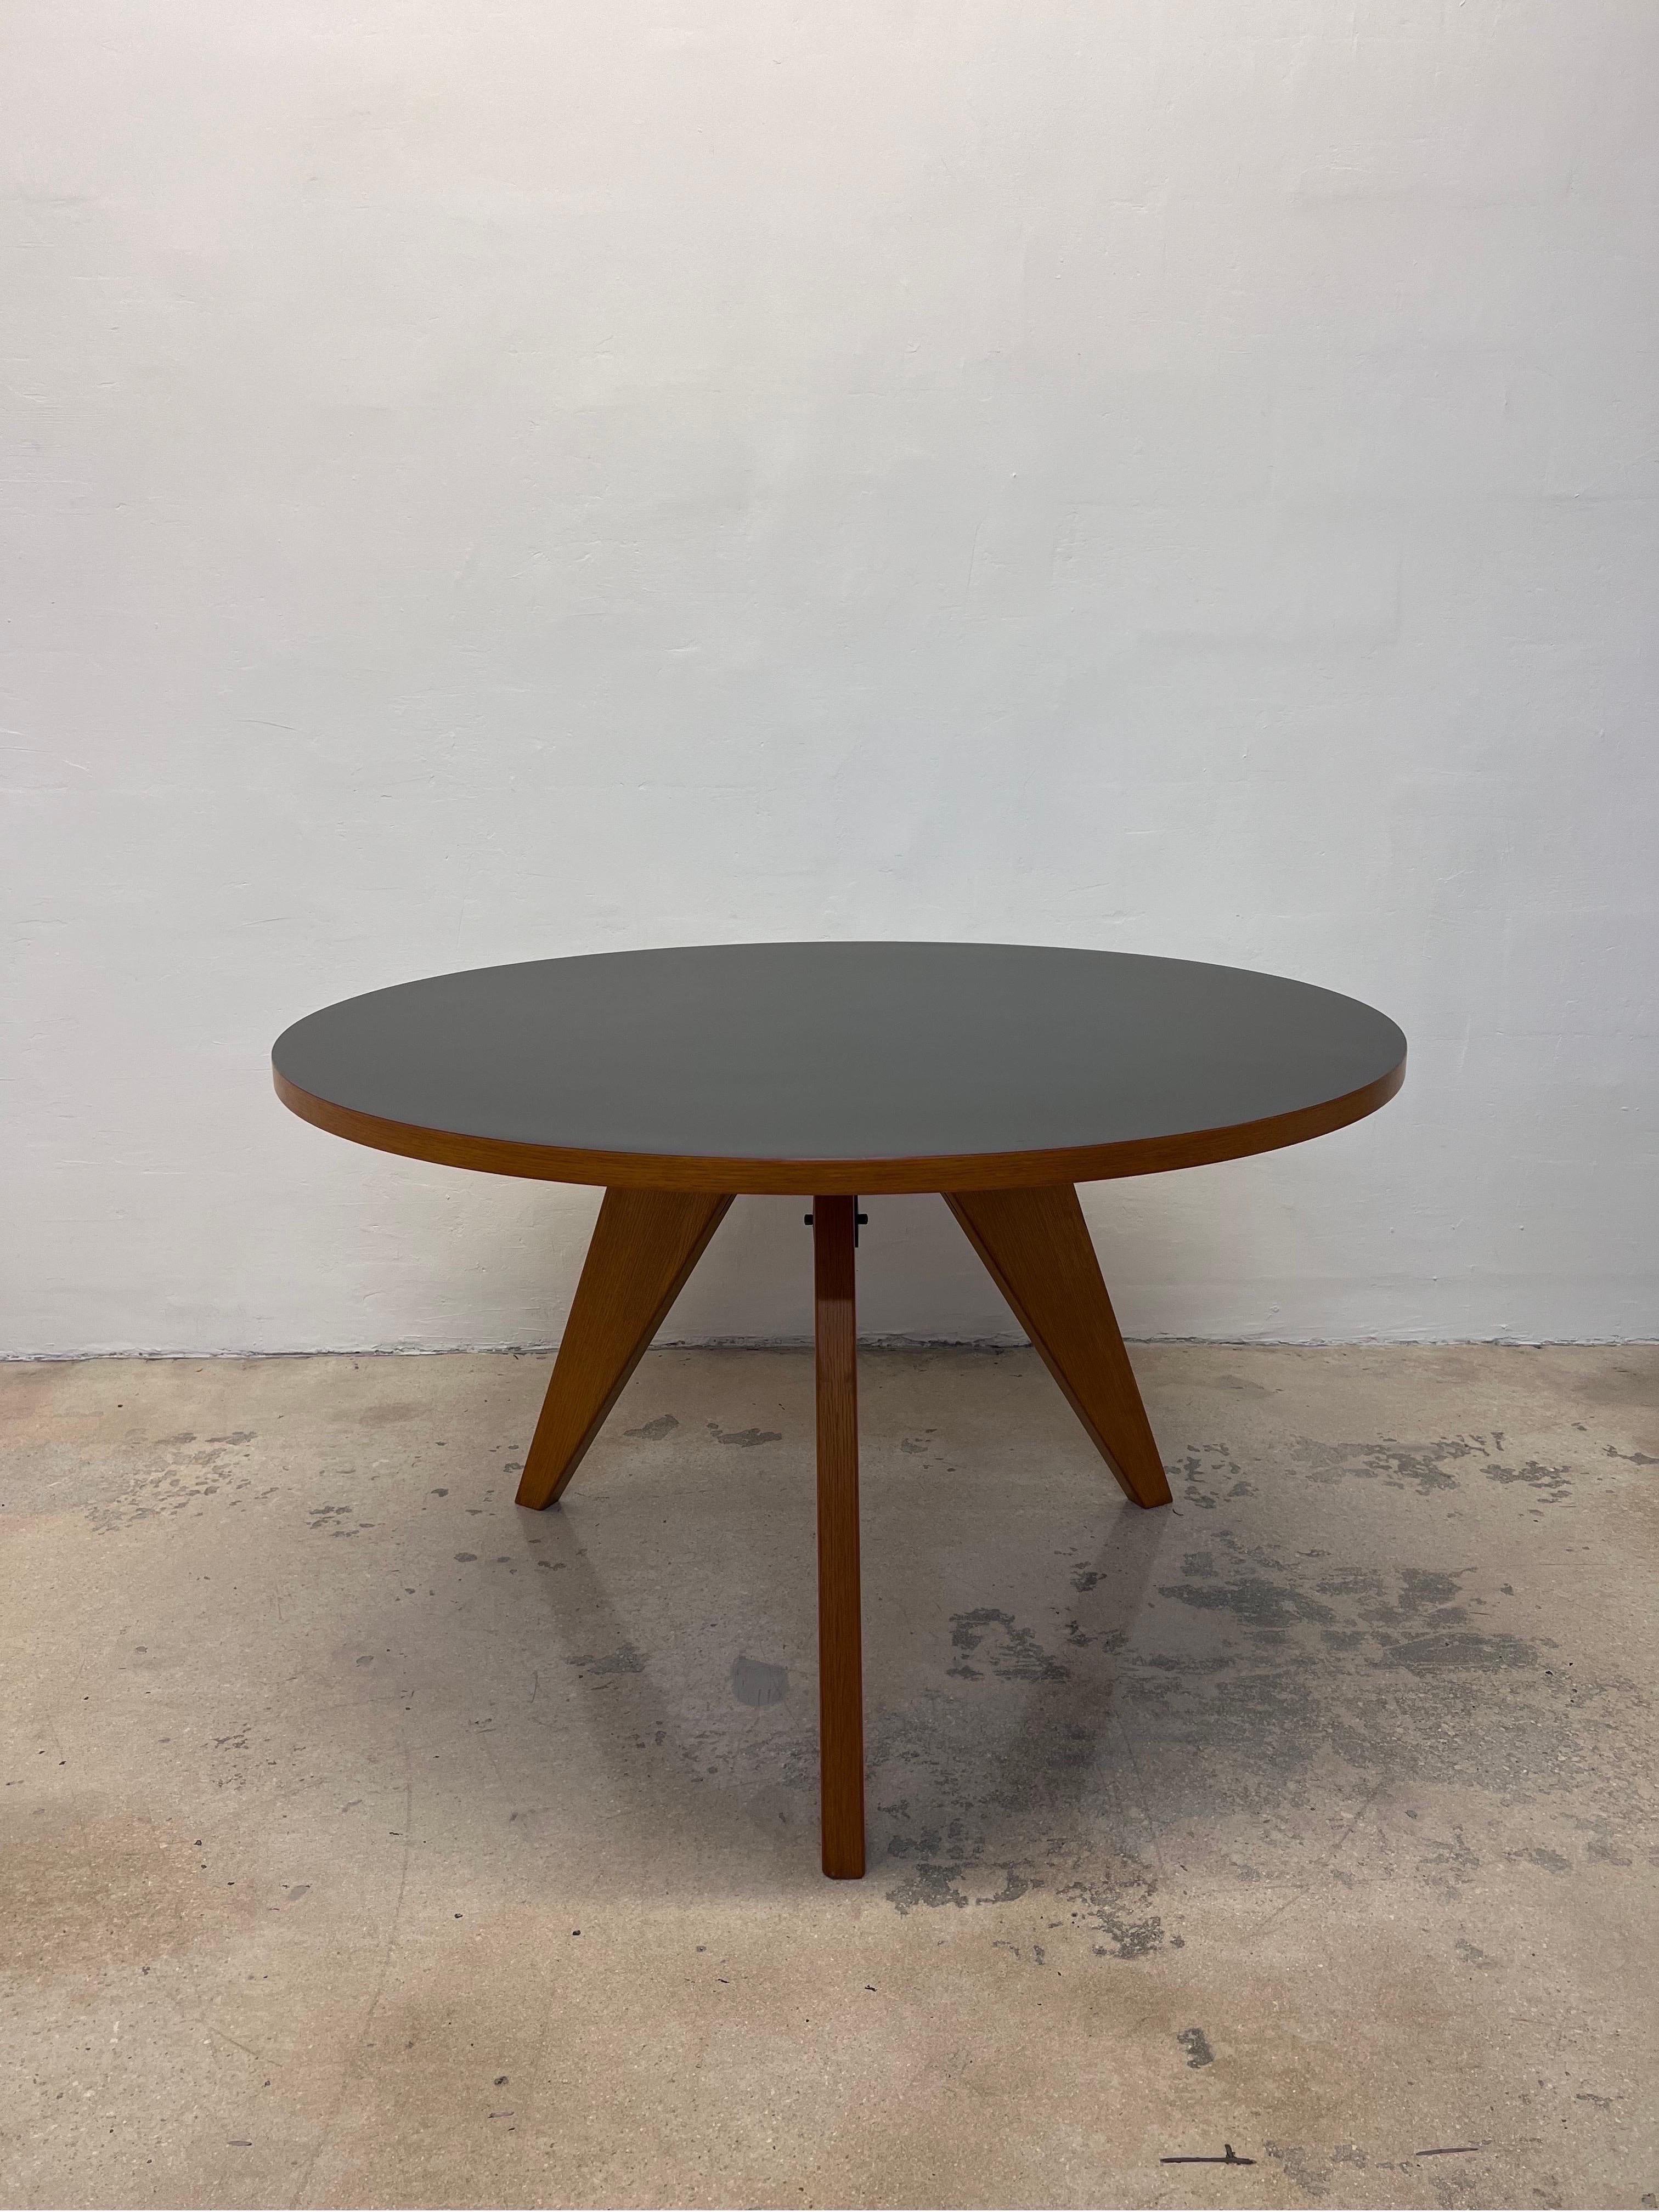 French Jean Prouve Gueridon Dining Table in Oak with Matte Black Top for Vitra, 2002